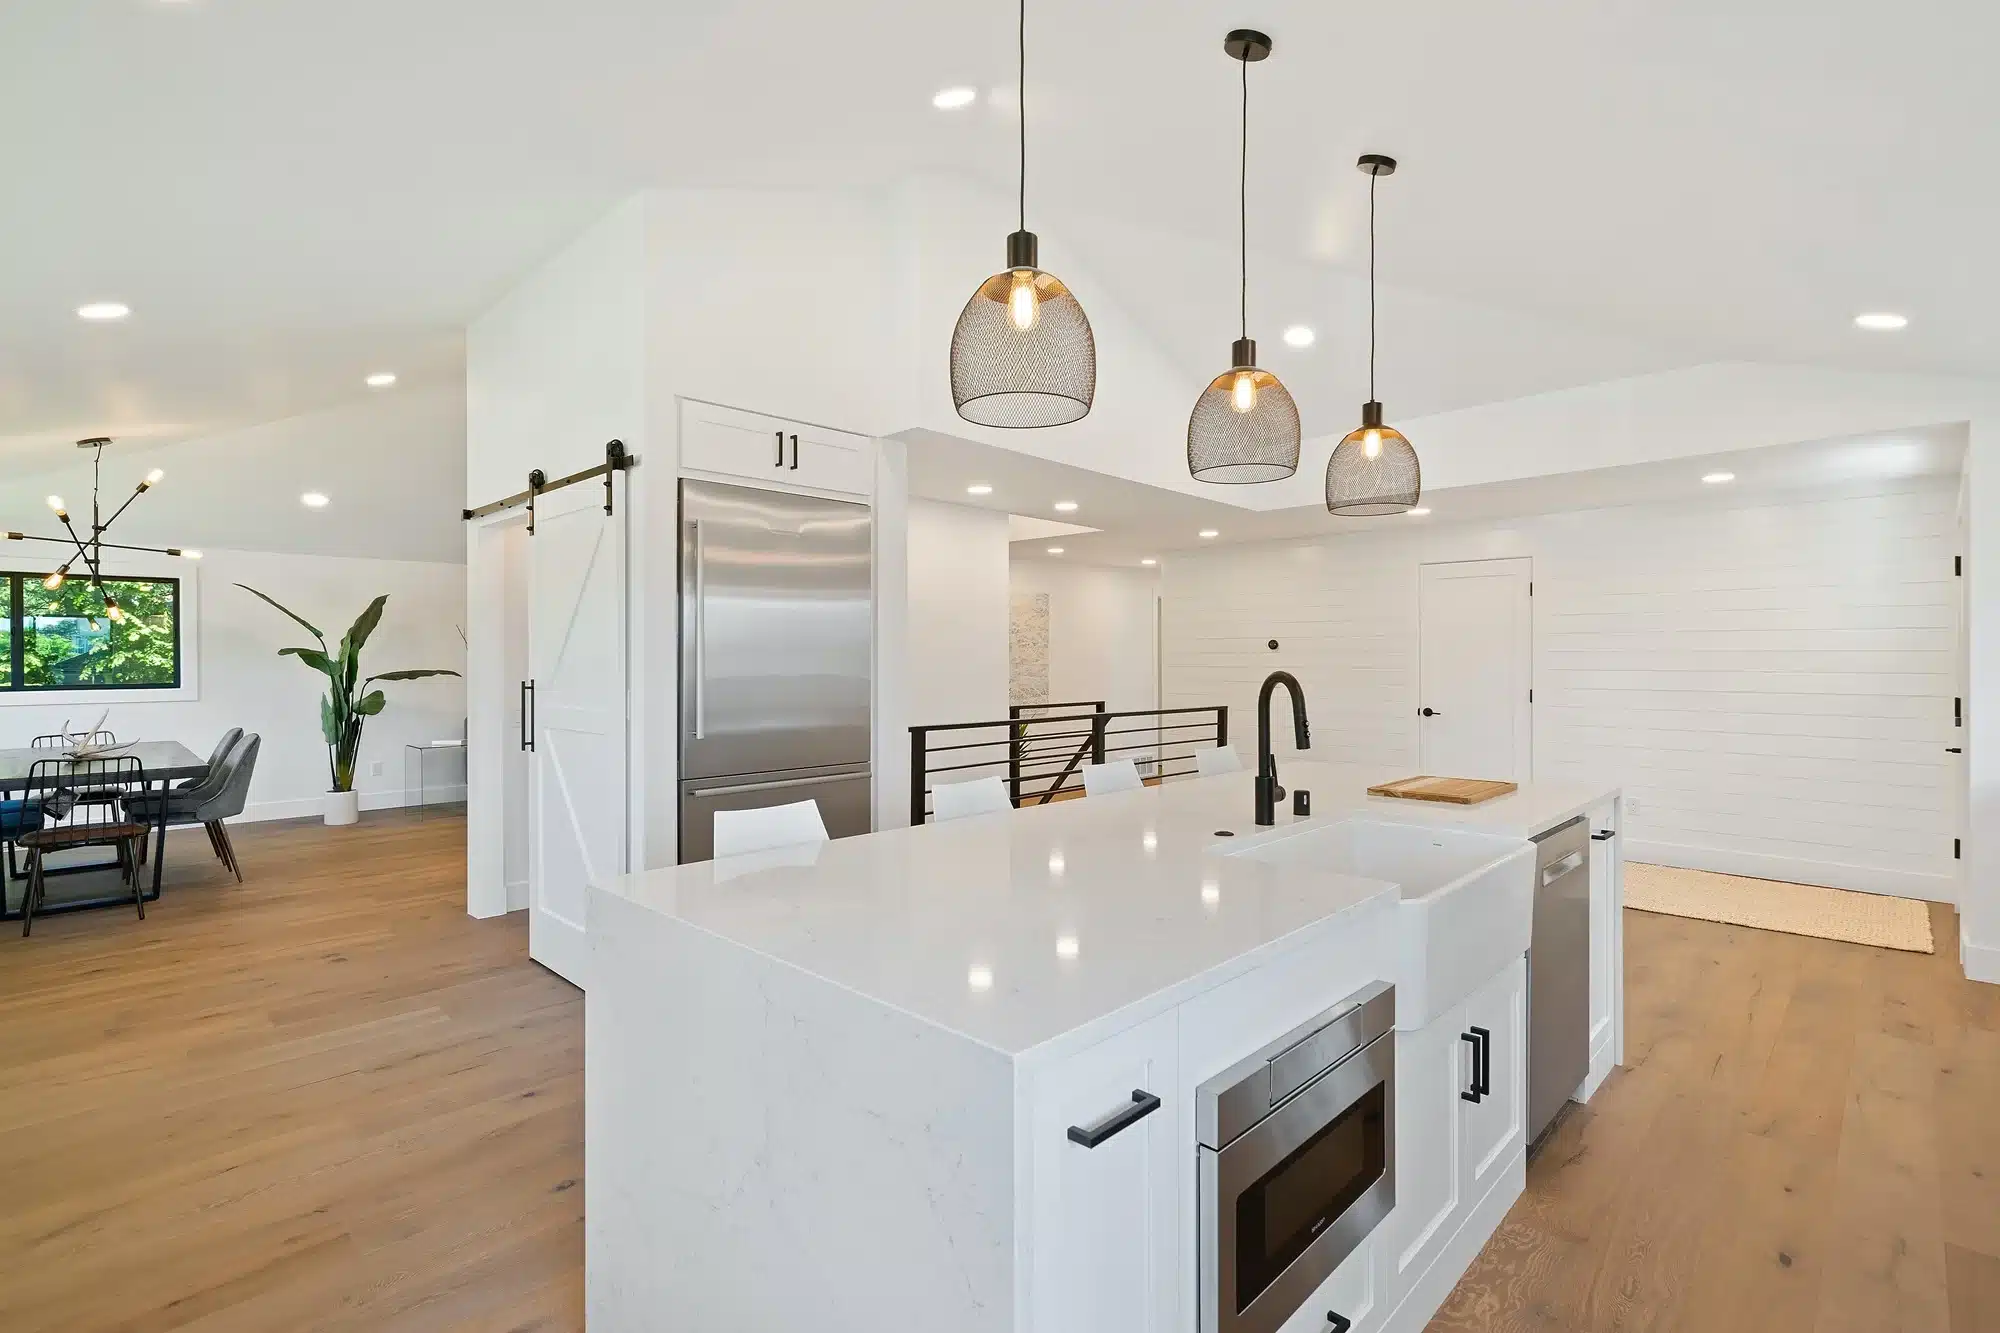 A white kitchen, representing the concept of family trust.